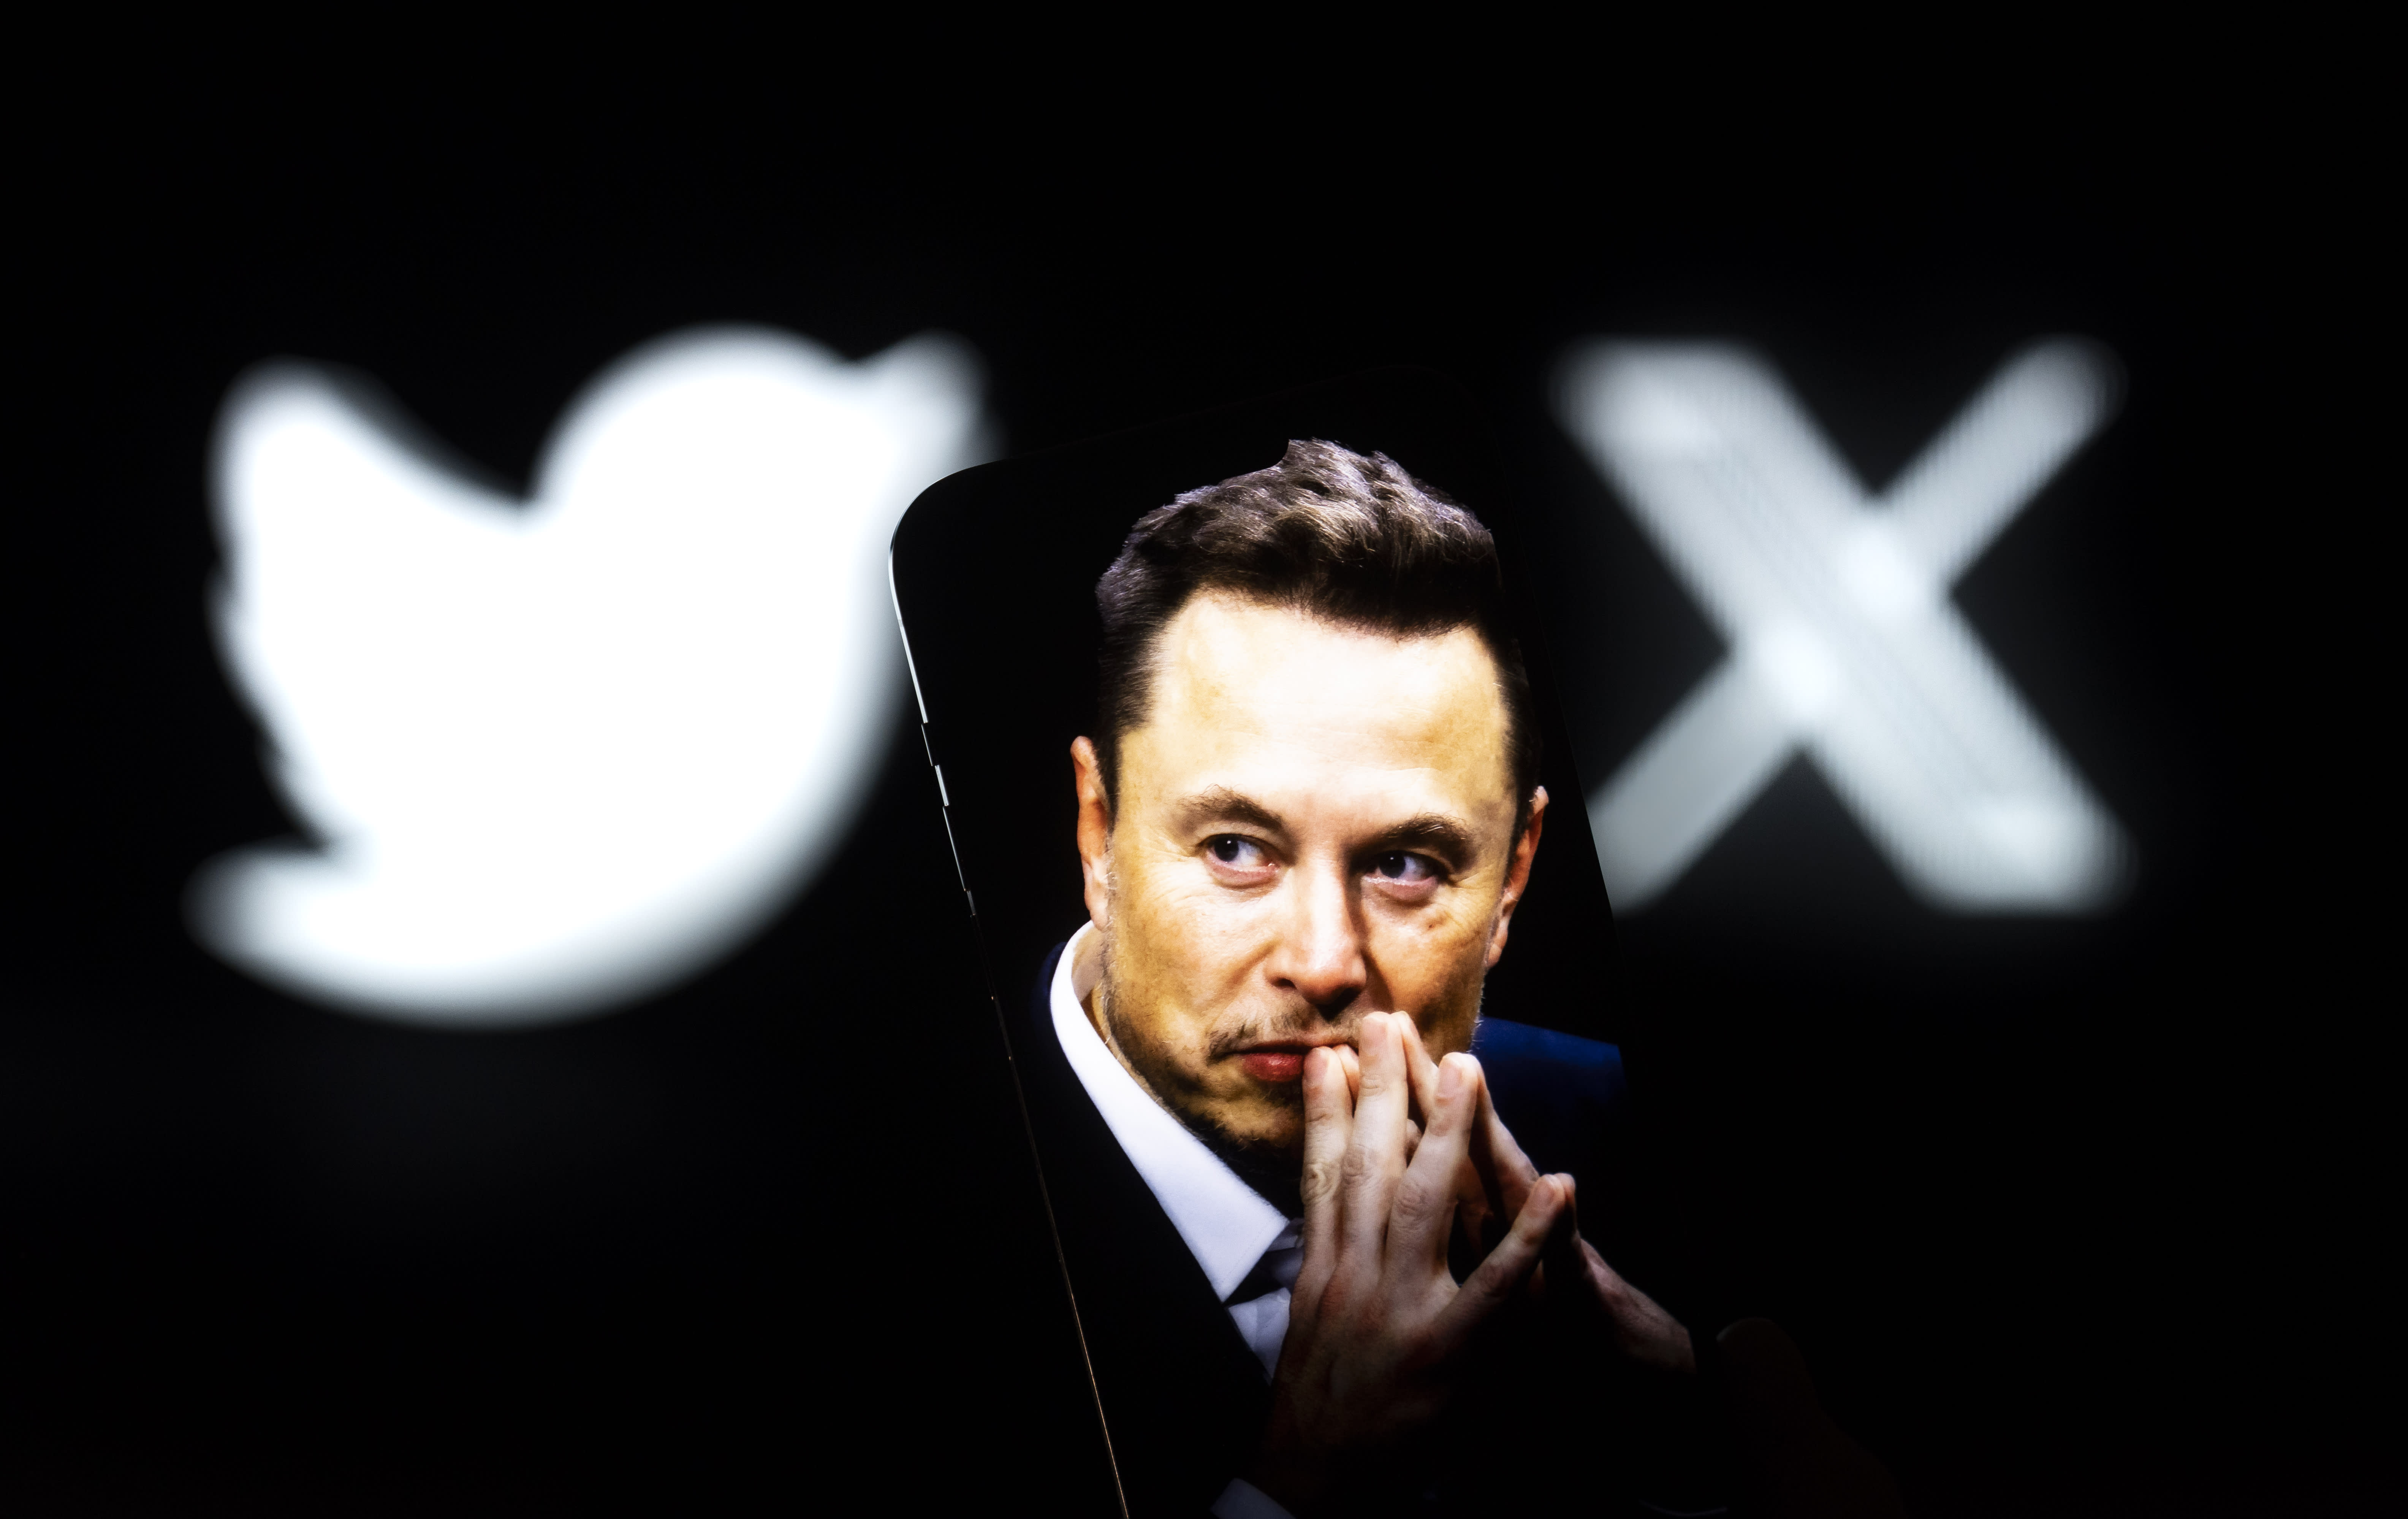 Harvard expert: Elon Musk is out of his element at Twitter, X